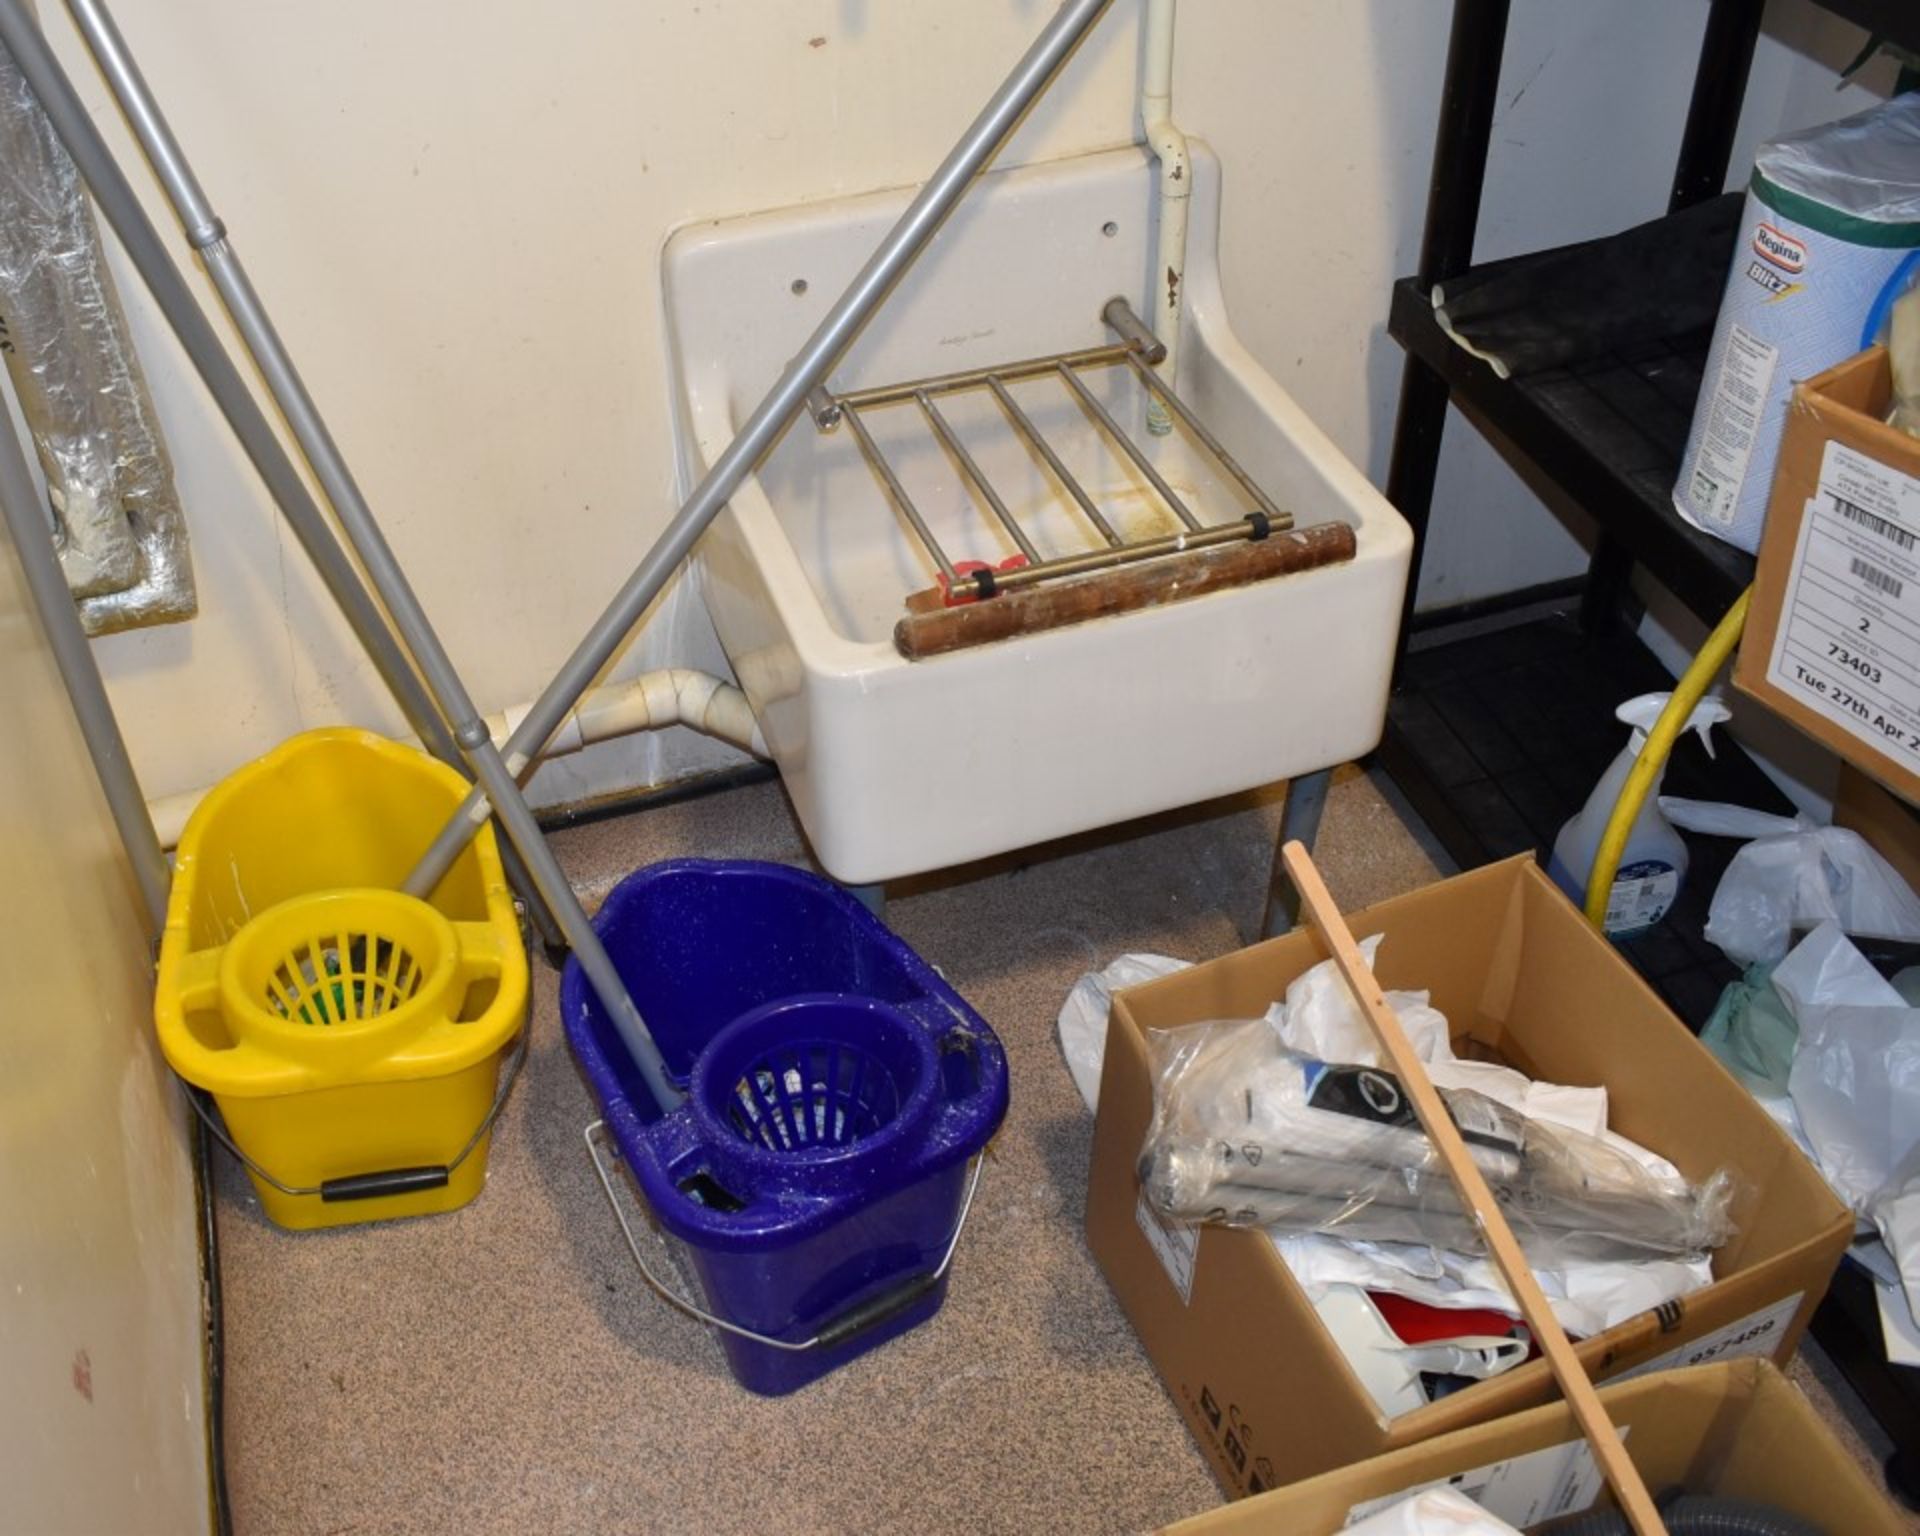 1 x Assorted Job Lot of Loose Cleaning Equipment - Includes Mops, Shelves, Binbags, Mop Heads - Image 3 of 10